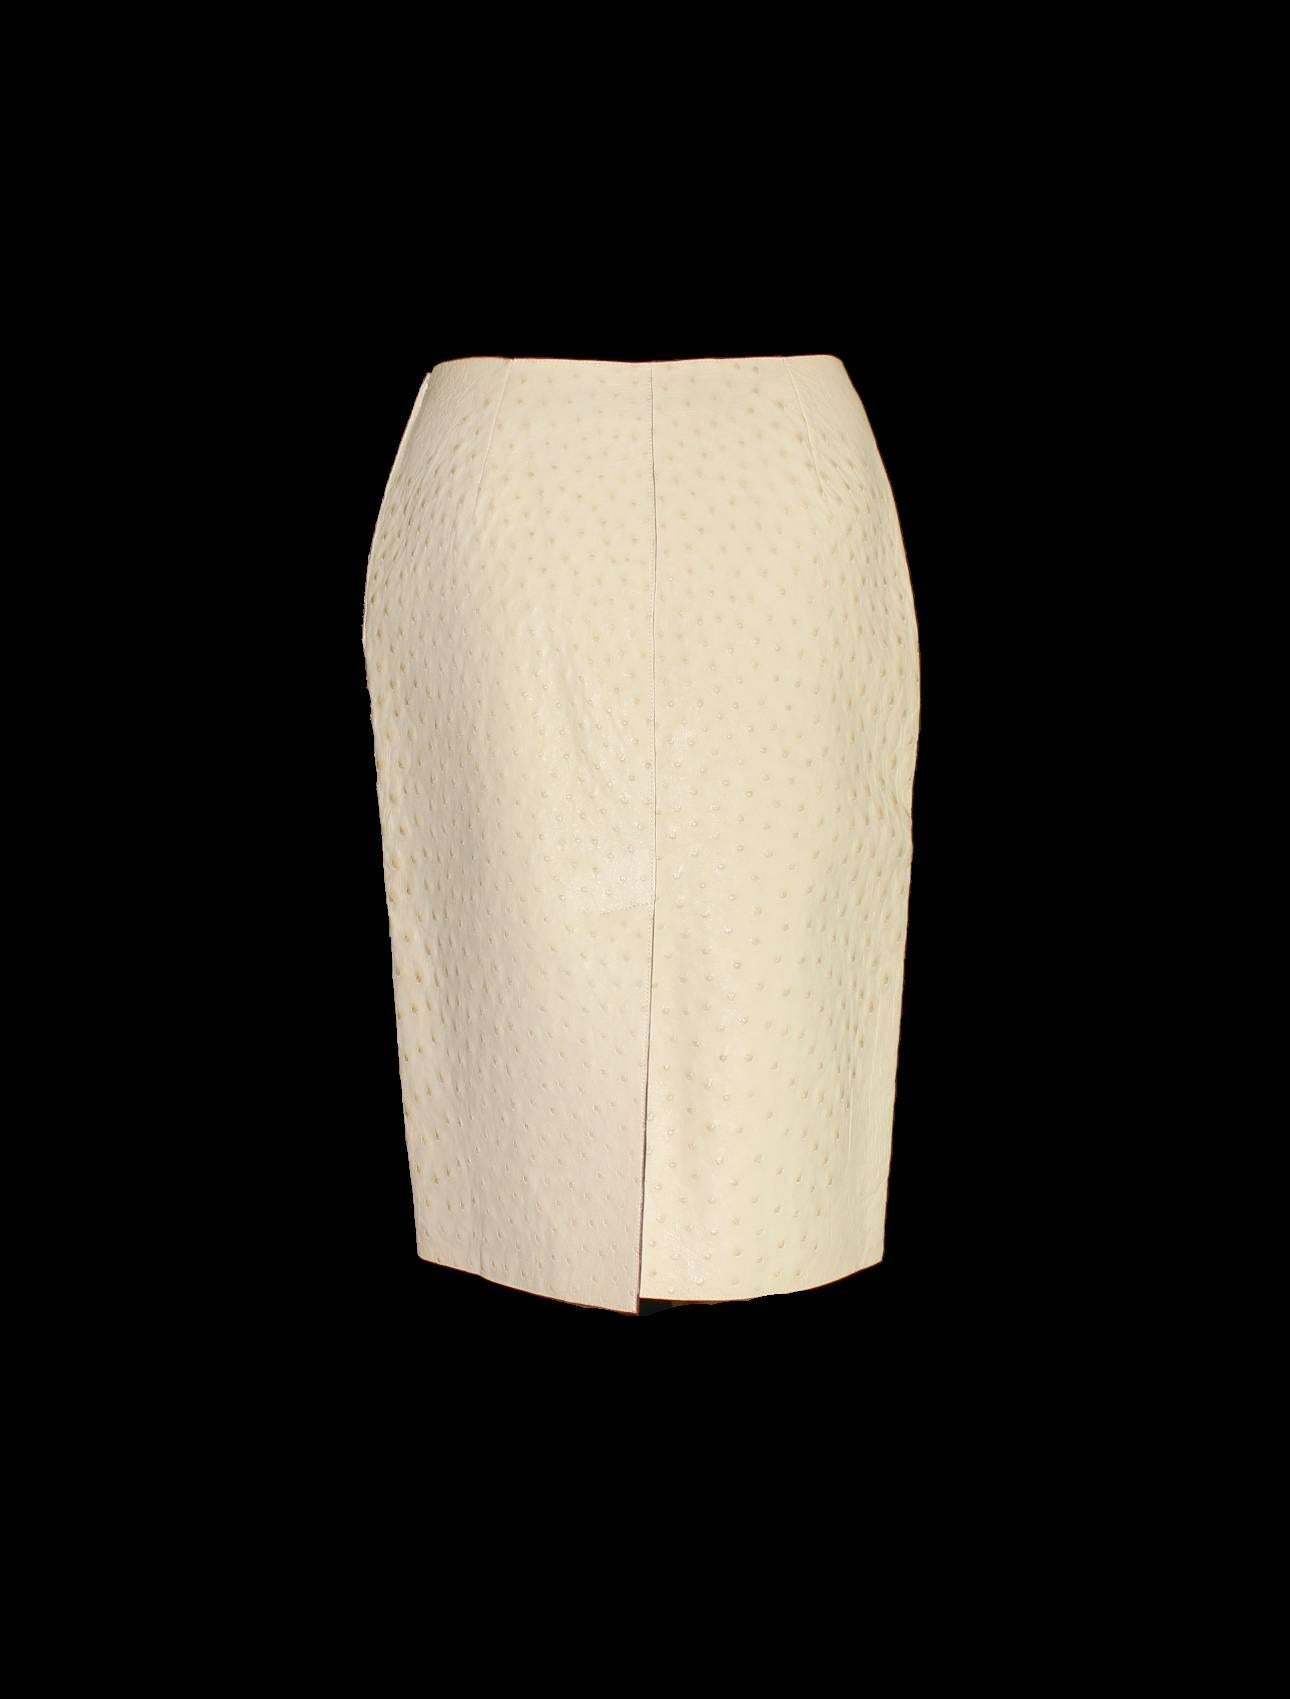 A stunning Ostrich Skin Skirt in fabulous ivory color
Timeless elegance in the most exclusive exotic skin
The skirt is approximately knee-length and slightly flared
It has a vent in the back
Made in Italy
Special Dry Clean
Size 42

Ostich skirts